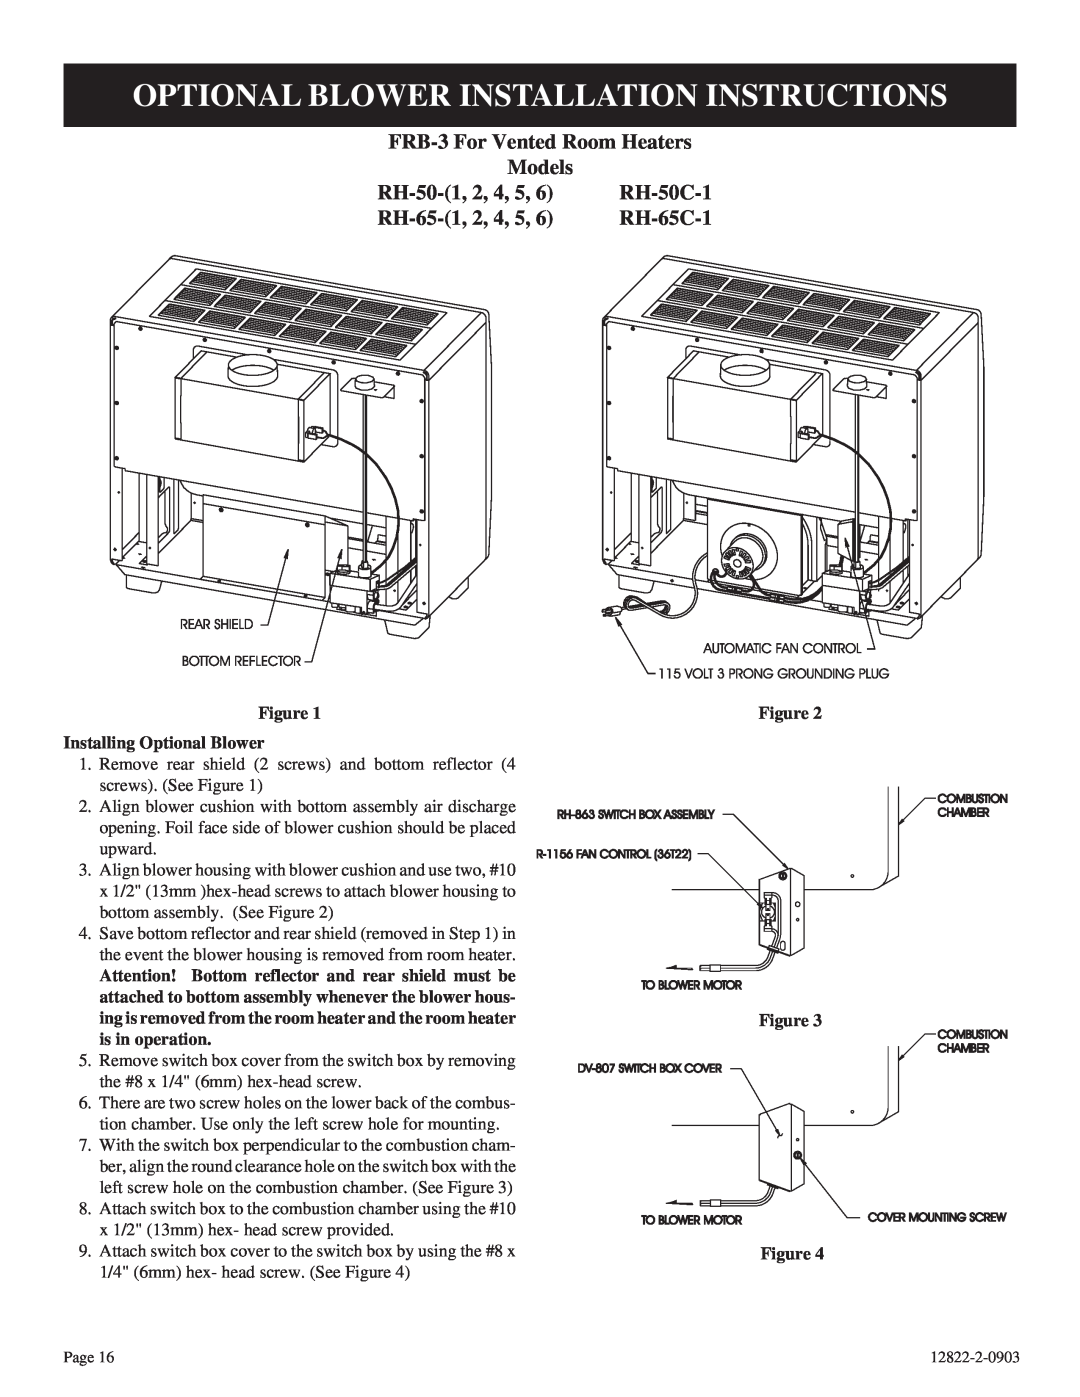 Empire Comfort Systems RH-50-6 Optional Blower Installation Instructions, FRB-3For Vented Room Heaters, Models, RH-50-1,2 